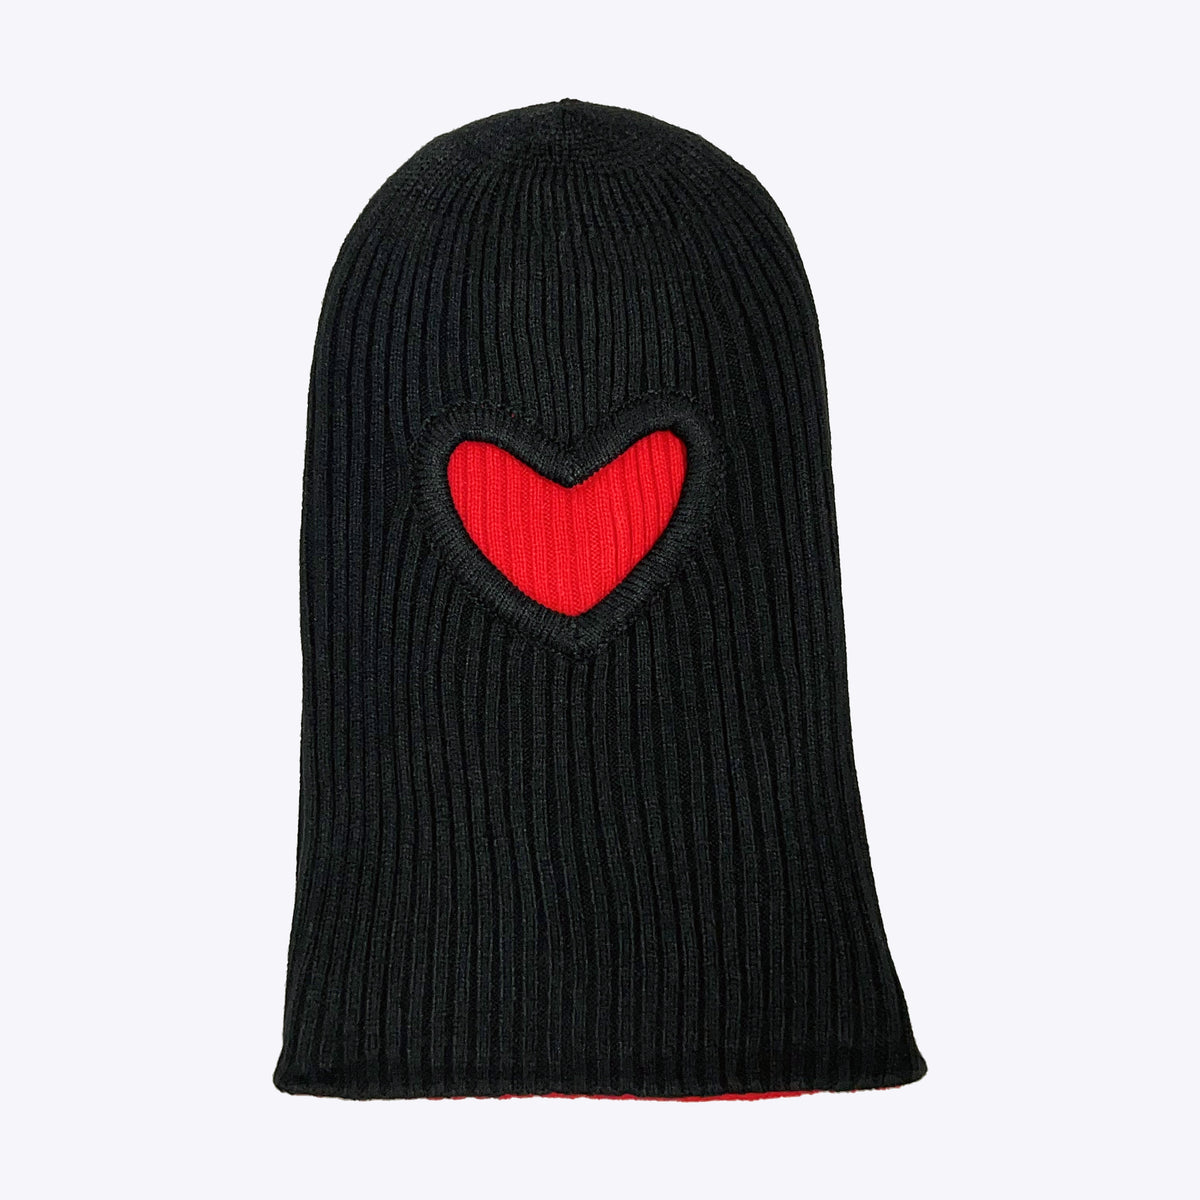 Heart Cut Out Reversible Balaclava Black/Red